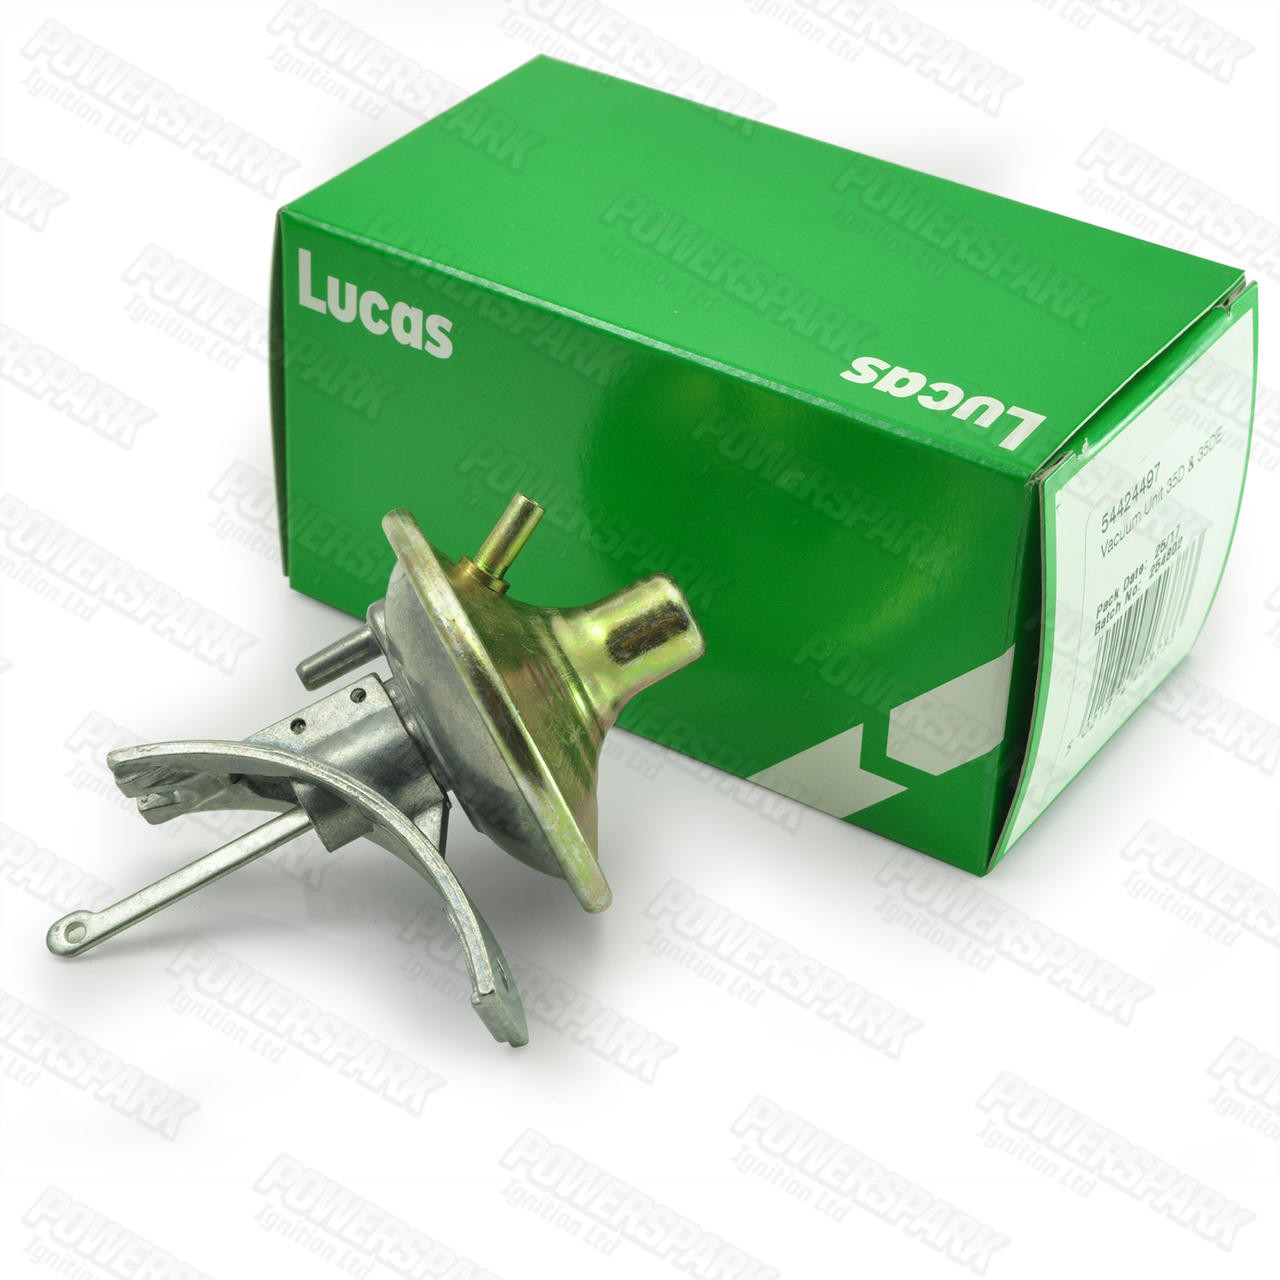 Lucas Lucas 35D V8 Distributor Electronic Late Vac 1976 on